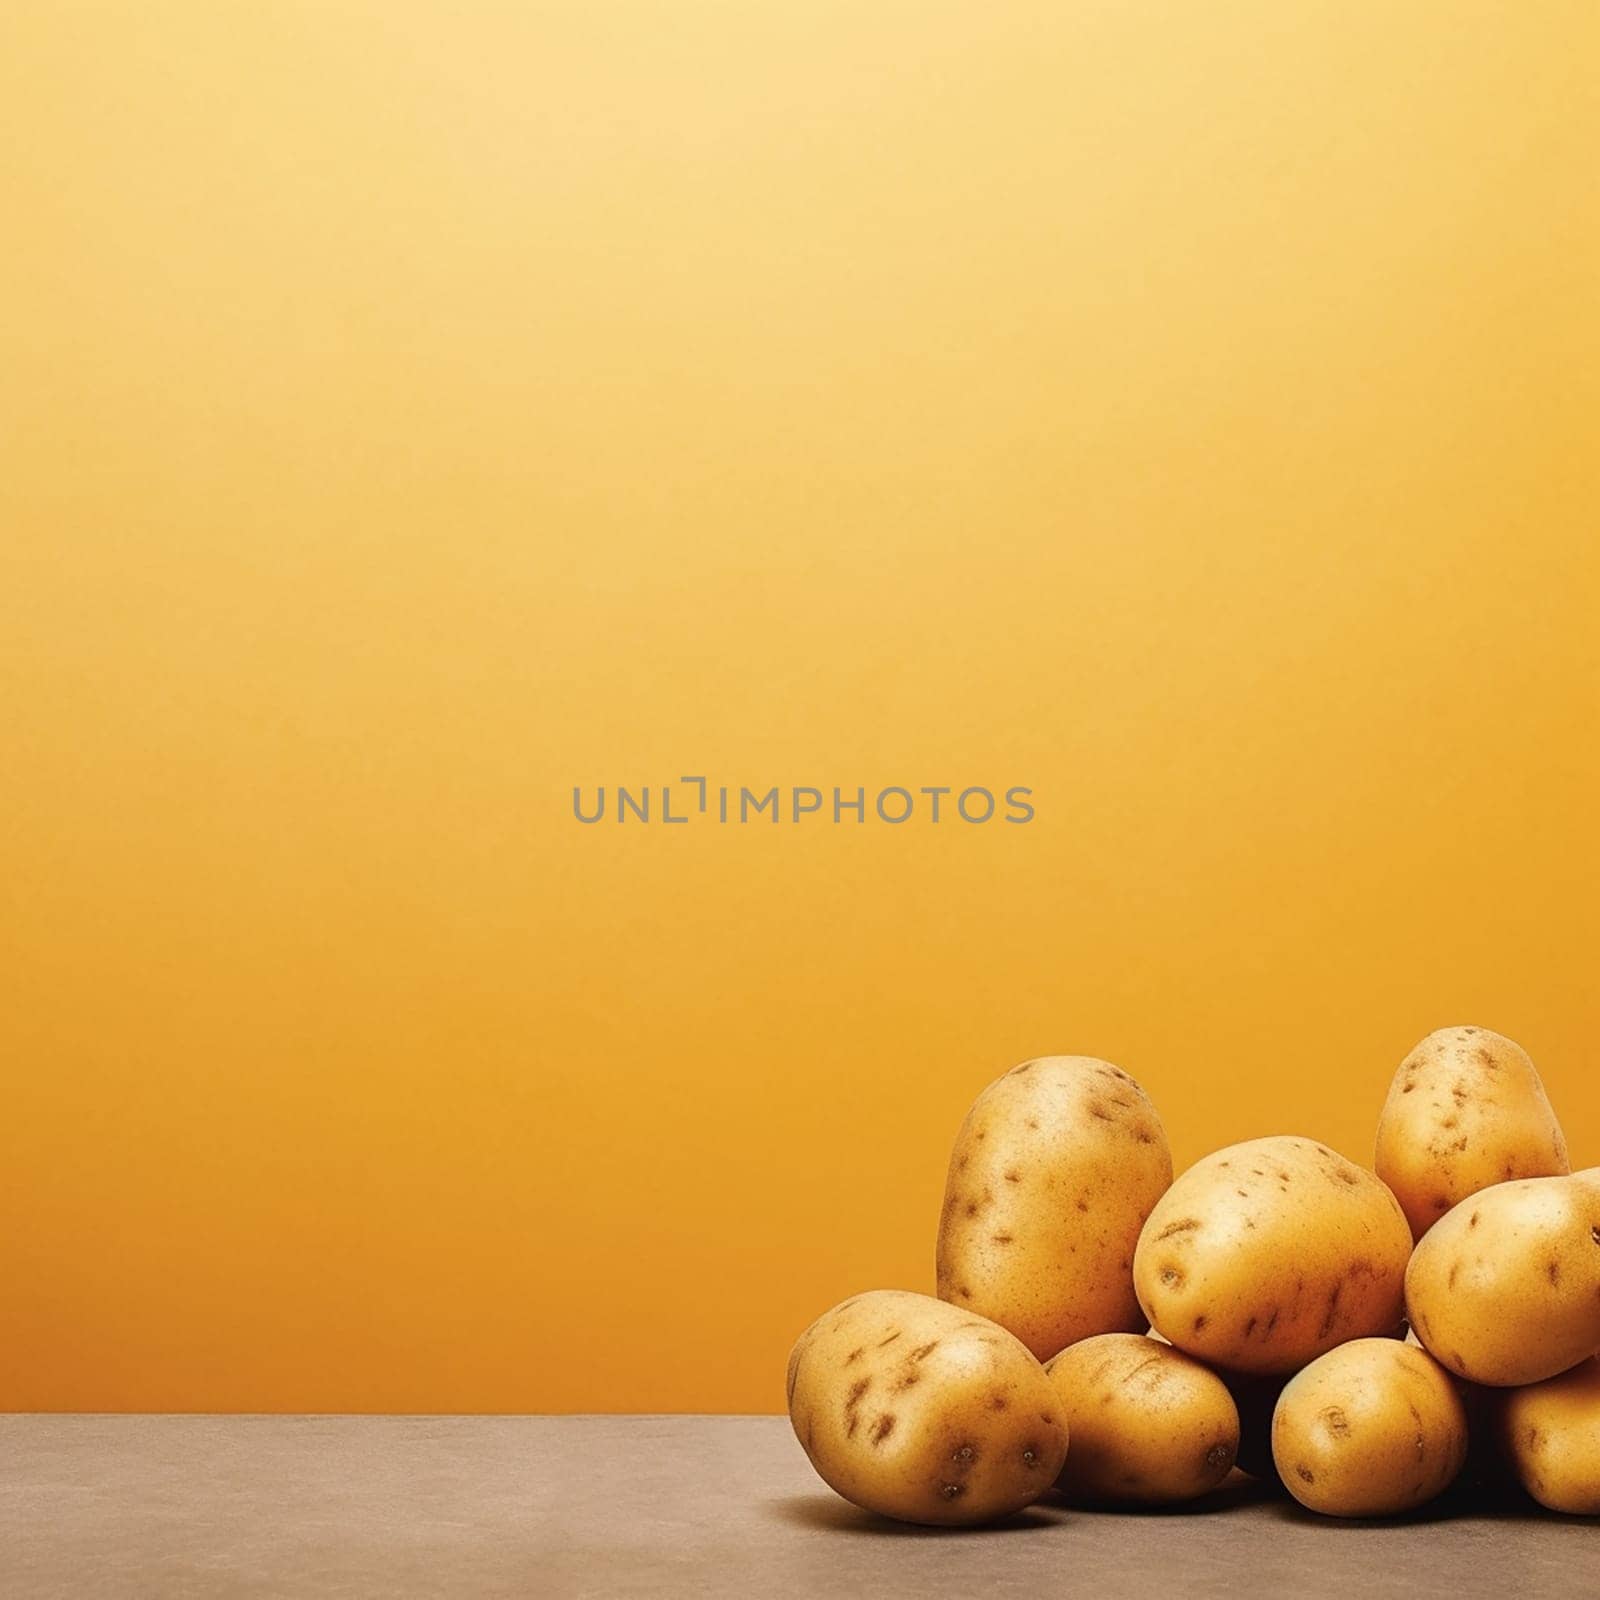 A pile of fresh potatoes against a plain yellow background.